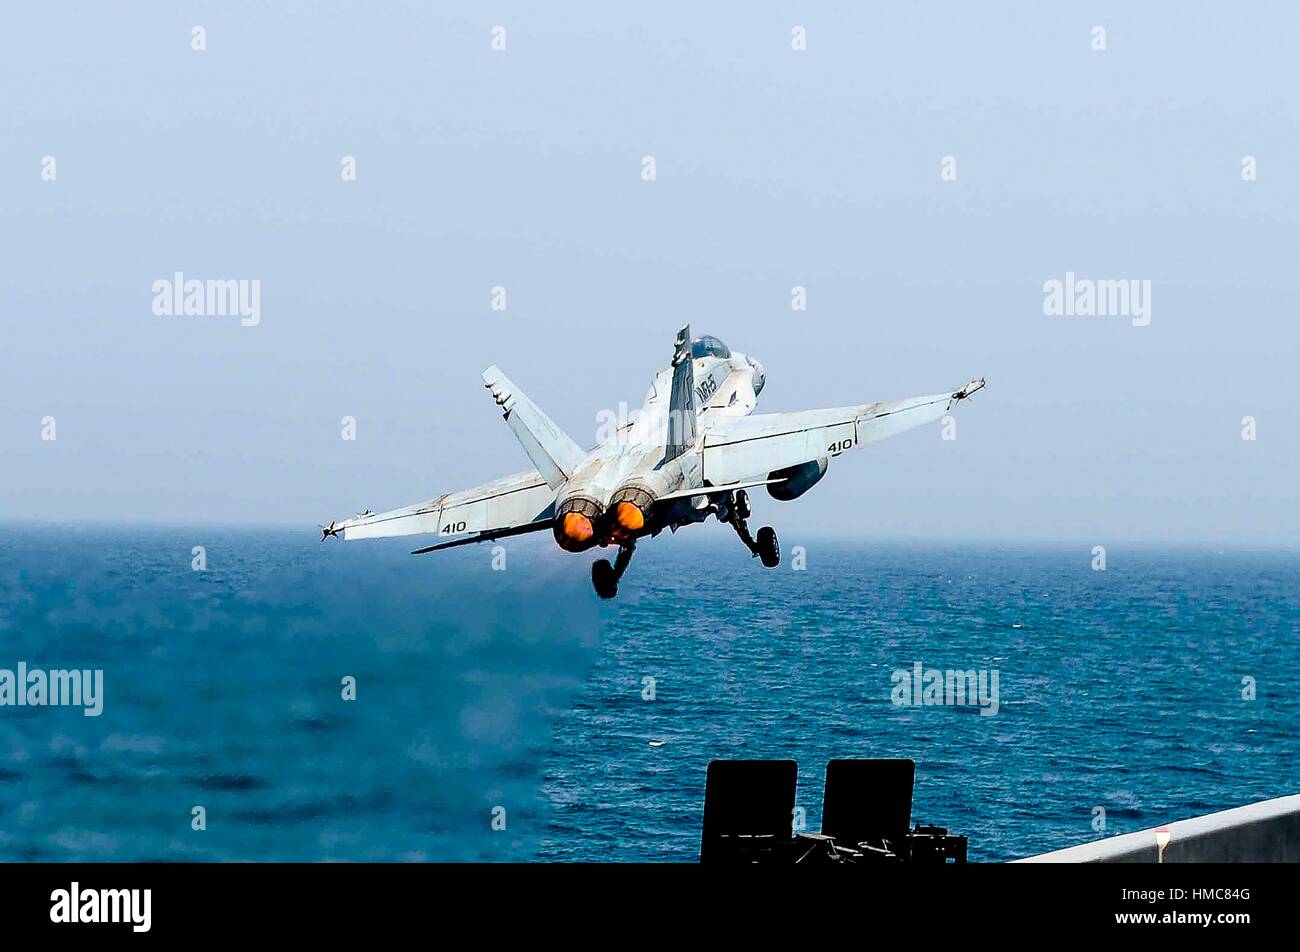 ARABIAN GULF (July 2, 2015) An F/A-18C Hornet assigned to the Thunderbolts of Marine Strike Fighter Squadron (VMFA) 251 launches from the flight deck Stock Photo